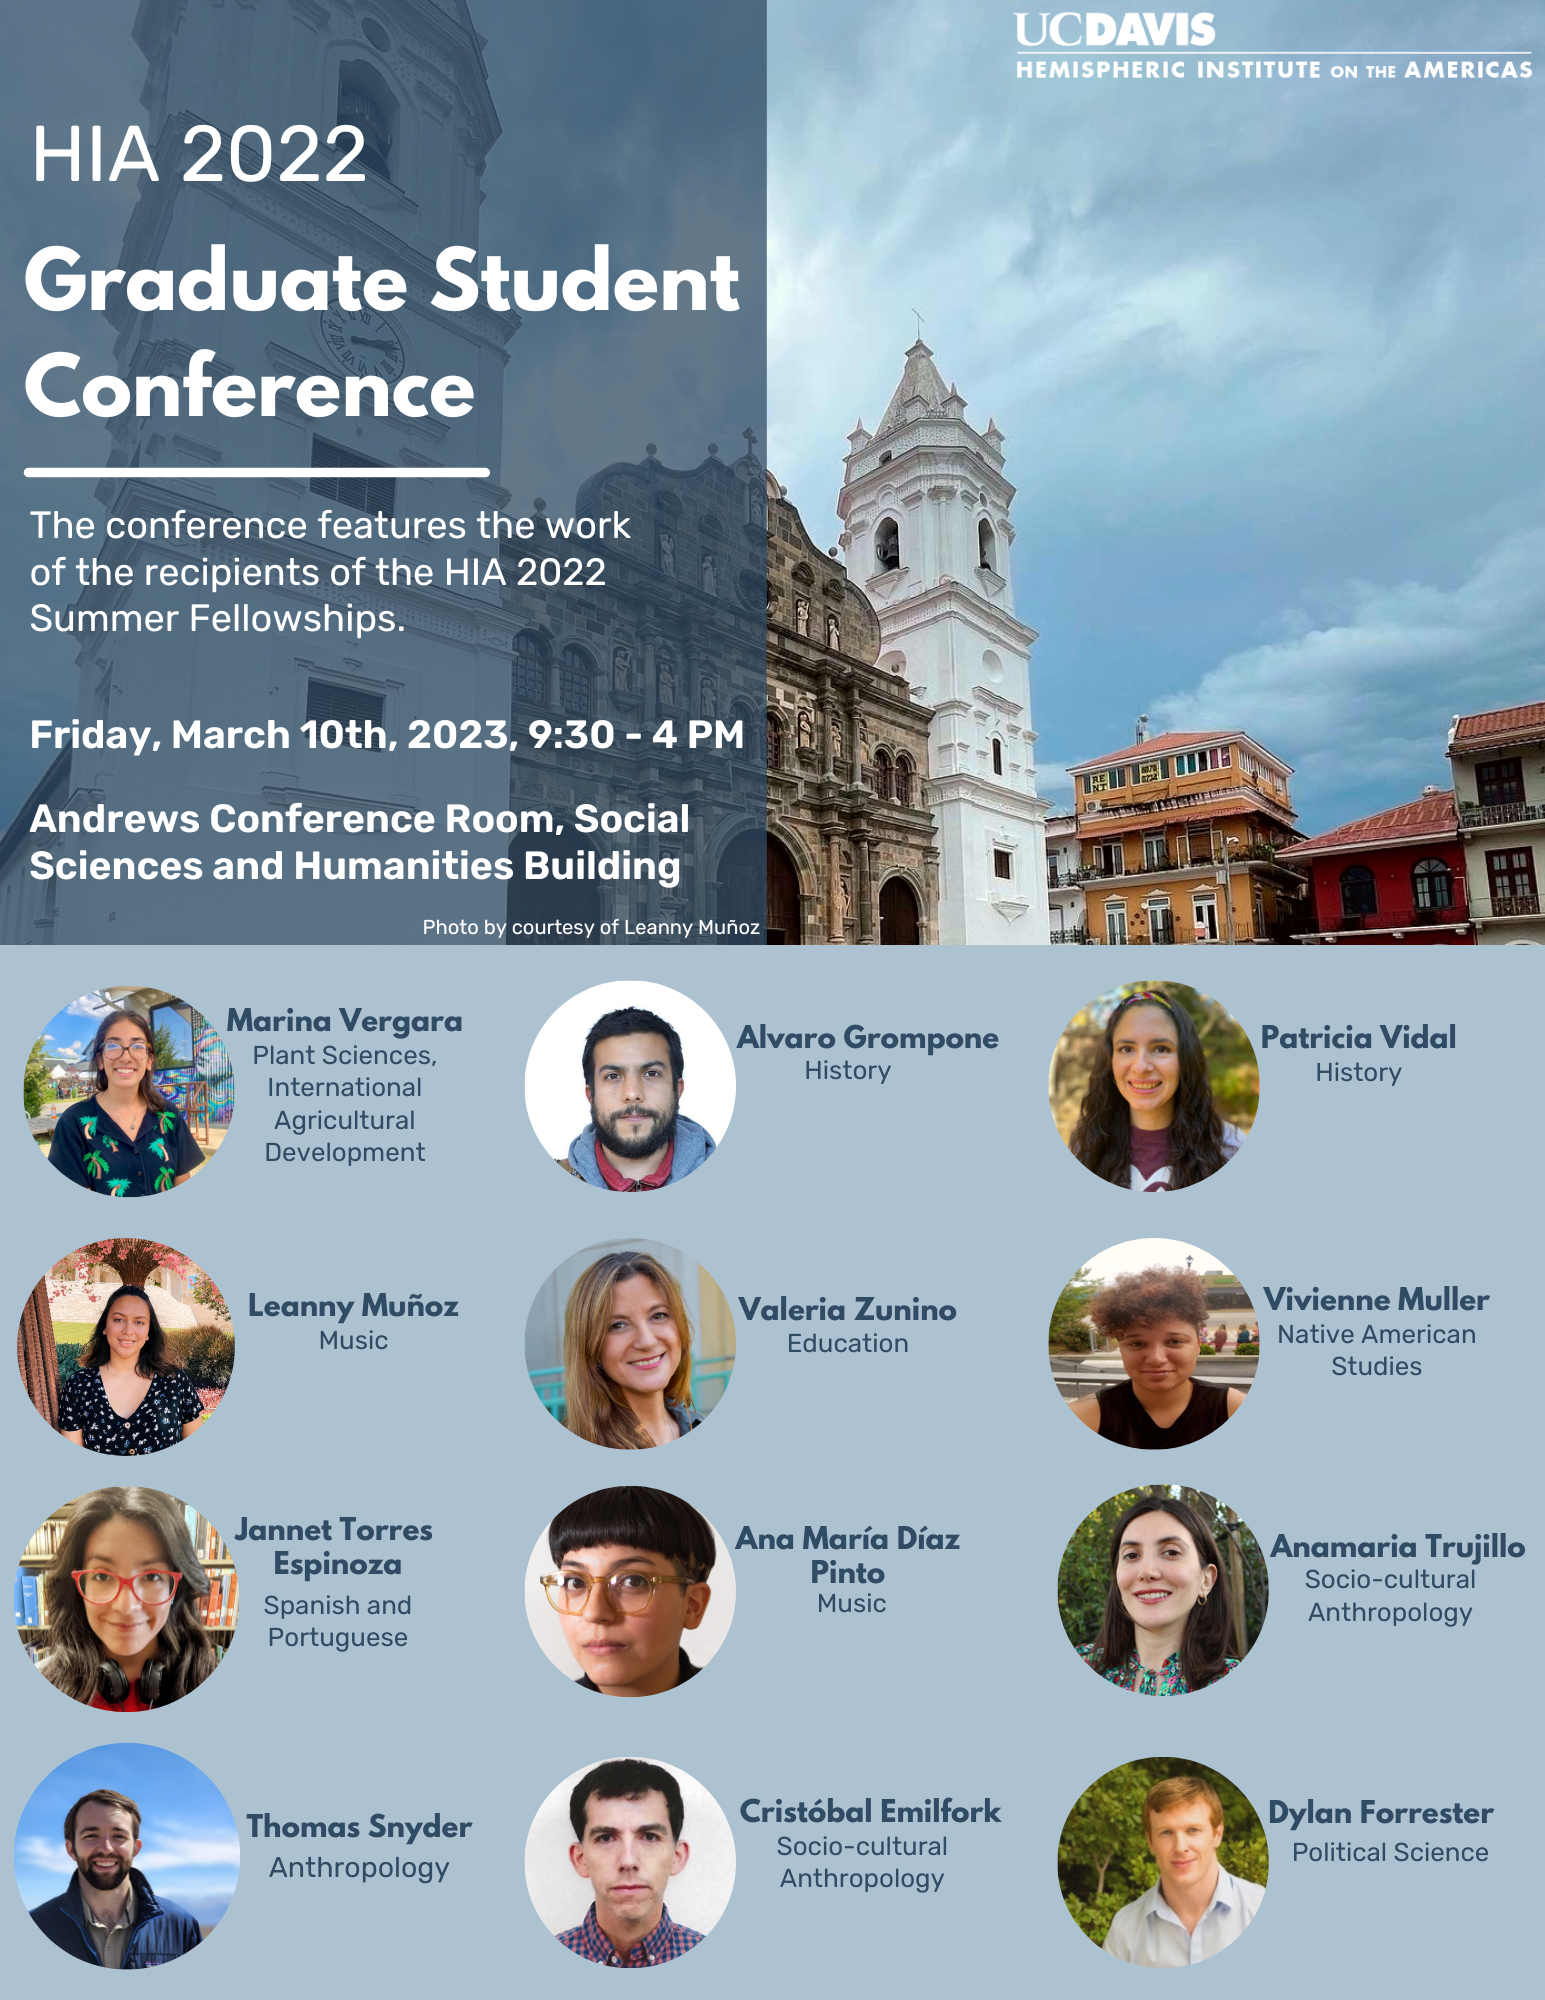 A poster for the HIA 2022 Graduate Student Conference